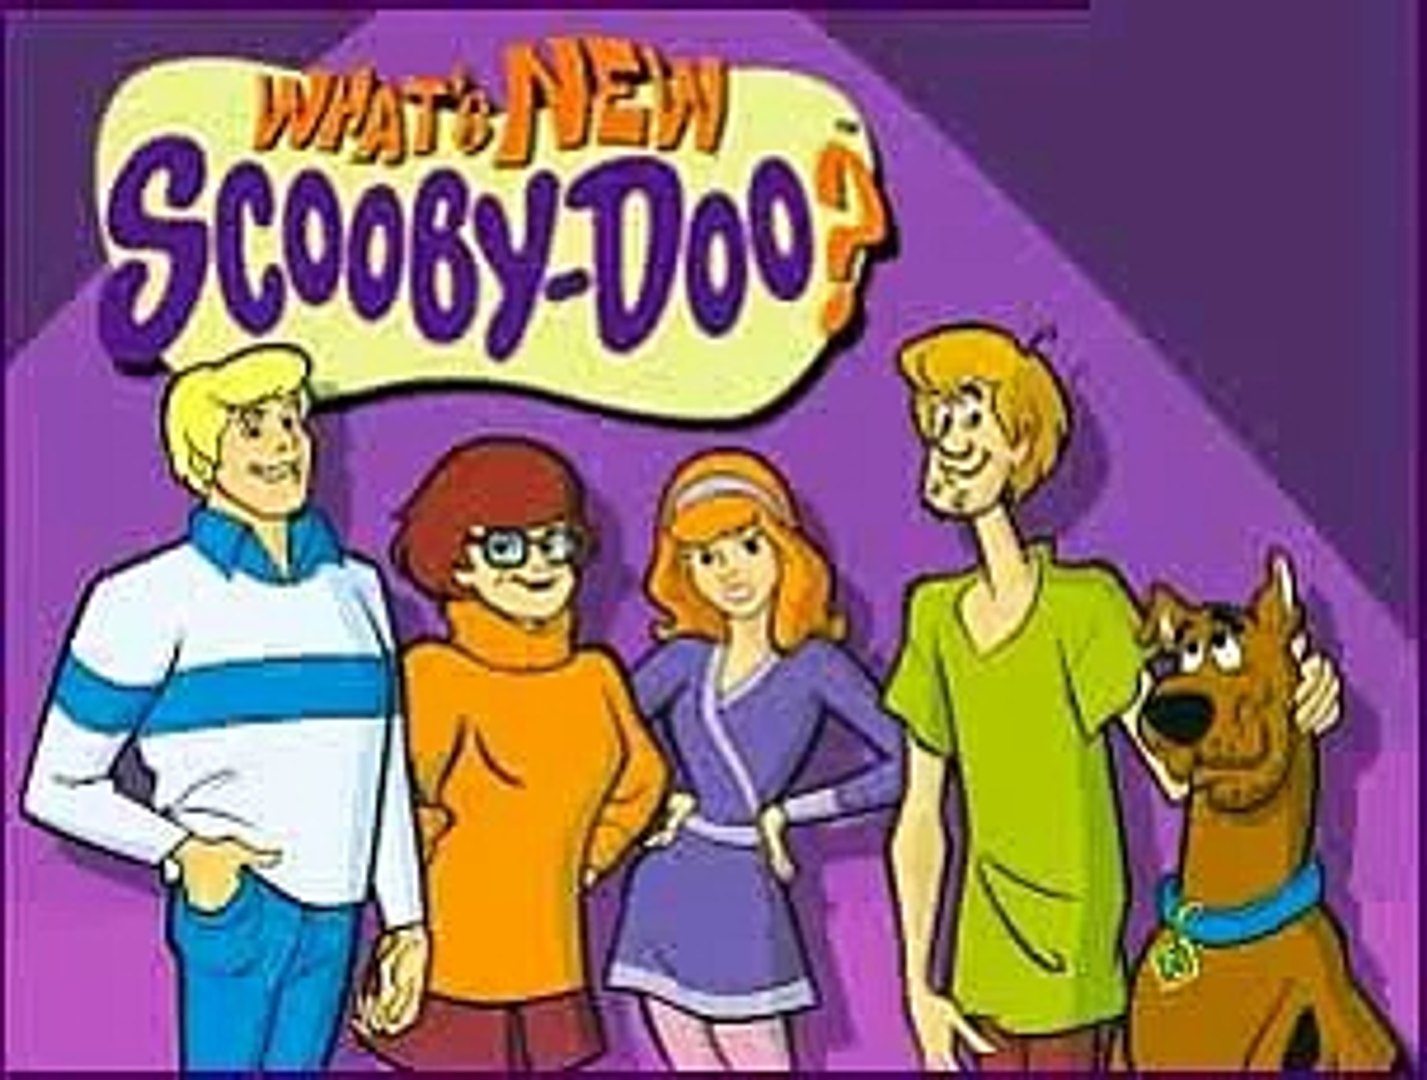 Whats New Scooby Doo Theme Song Dailymotion Video - whats new scooby doo roblox id